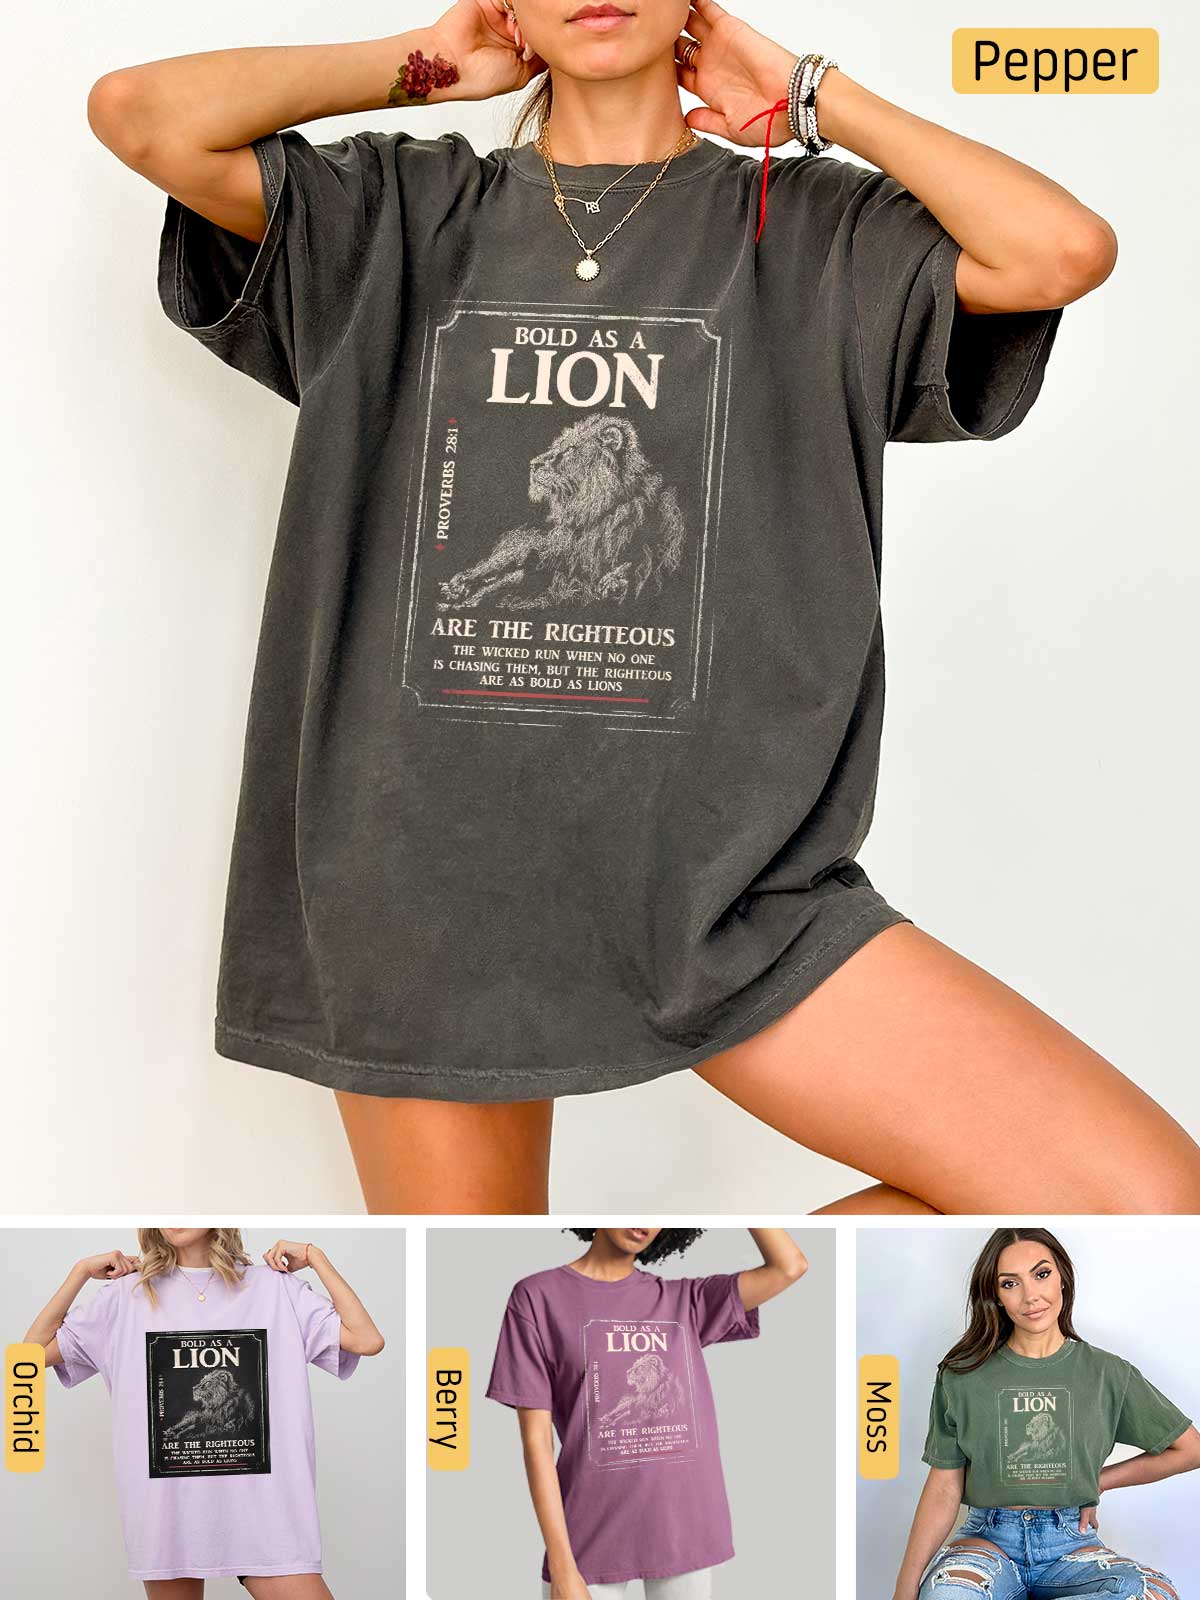 a woman wearing a lion t - shirt and shorts